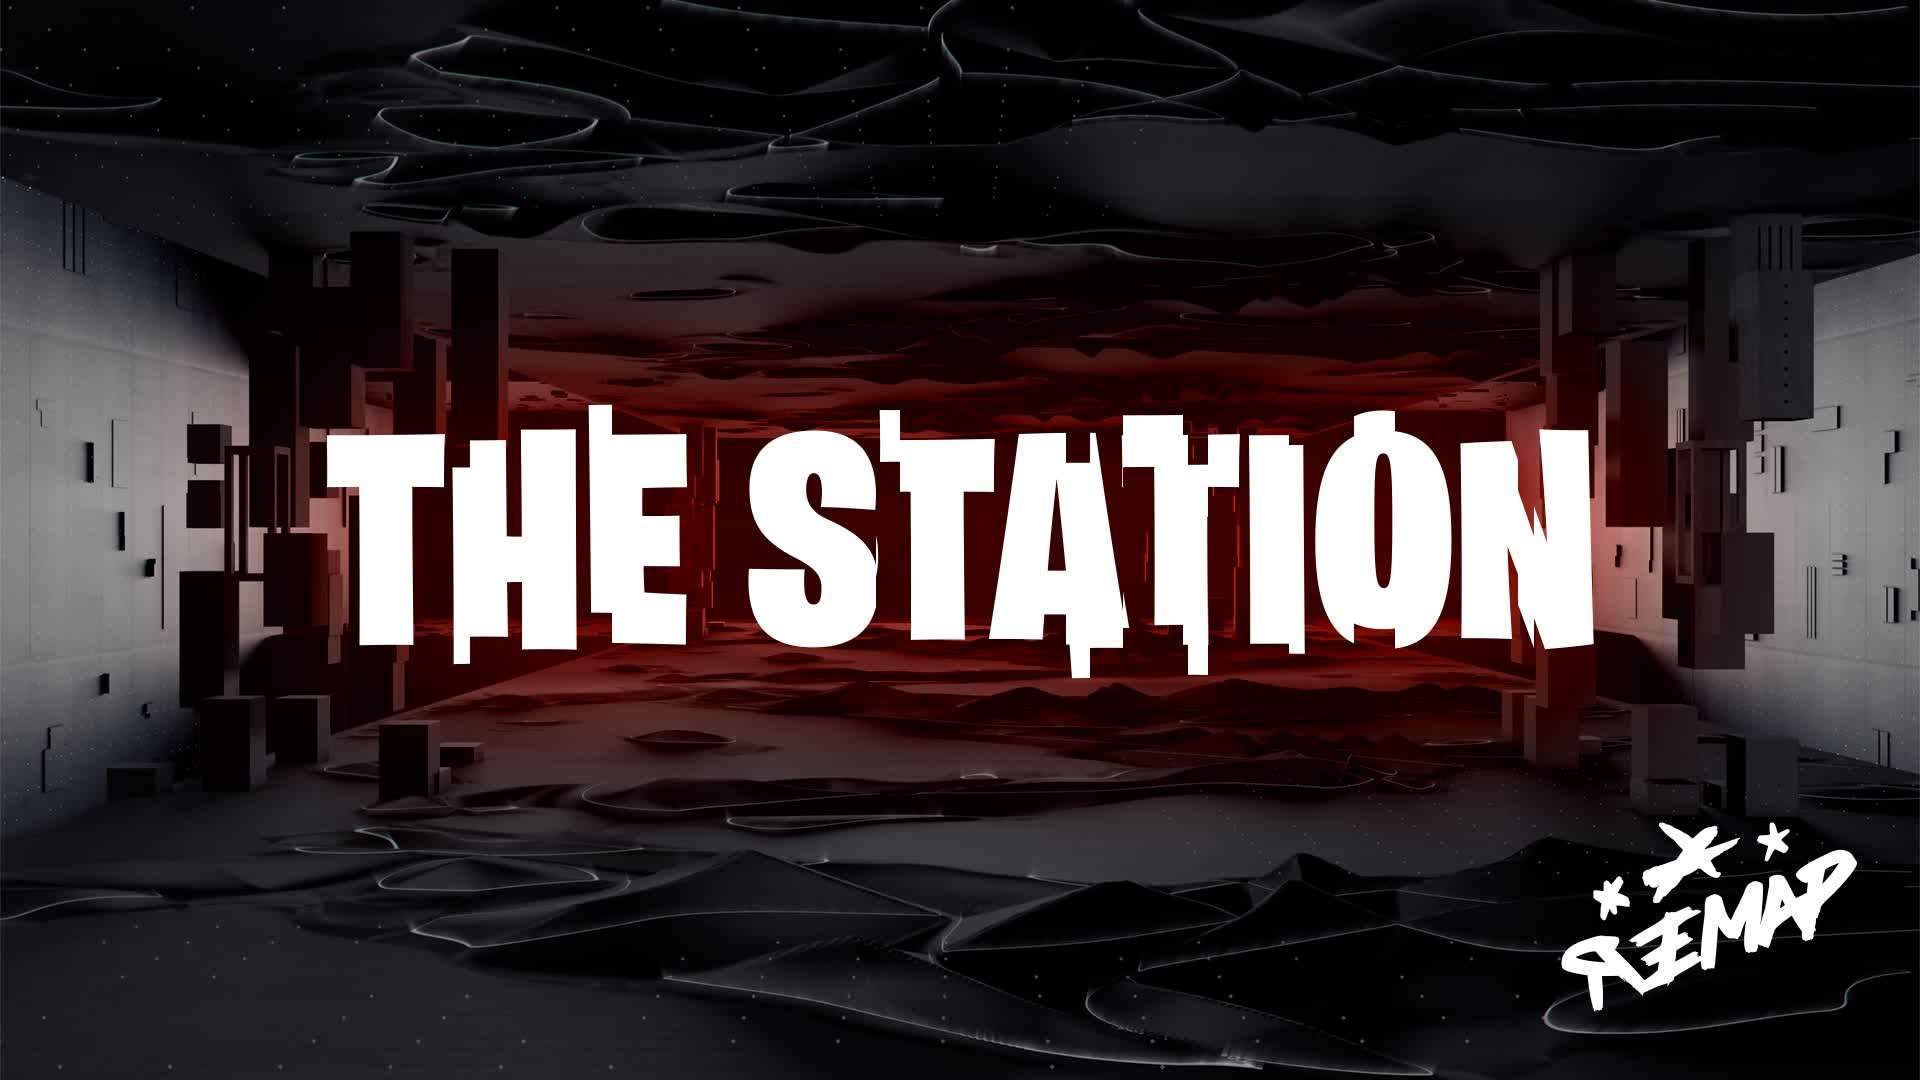 THE STATION